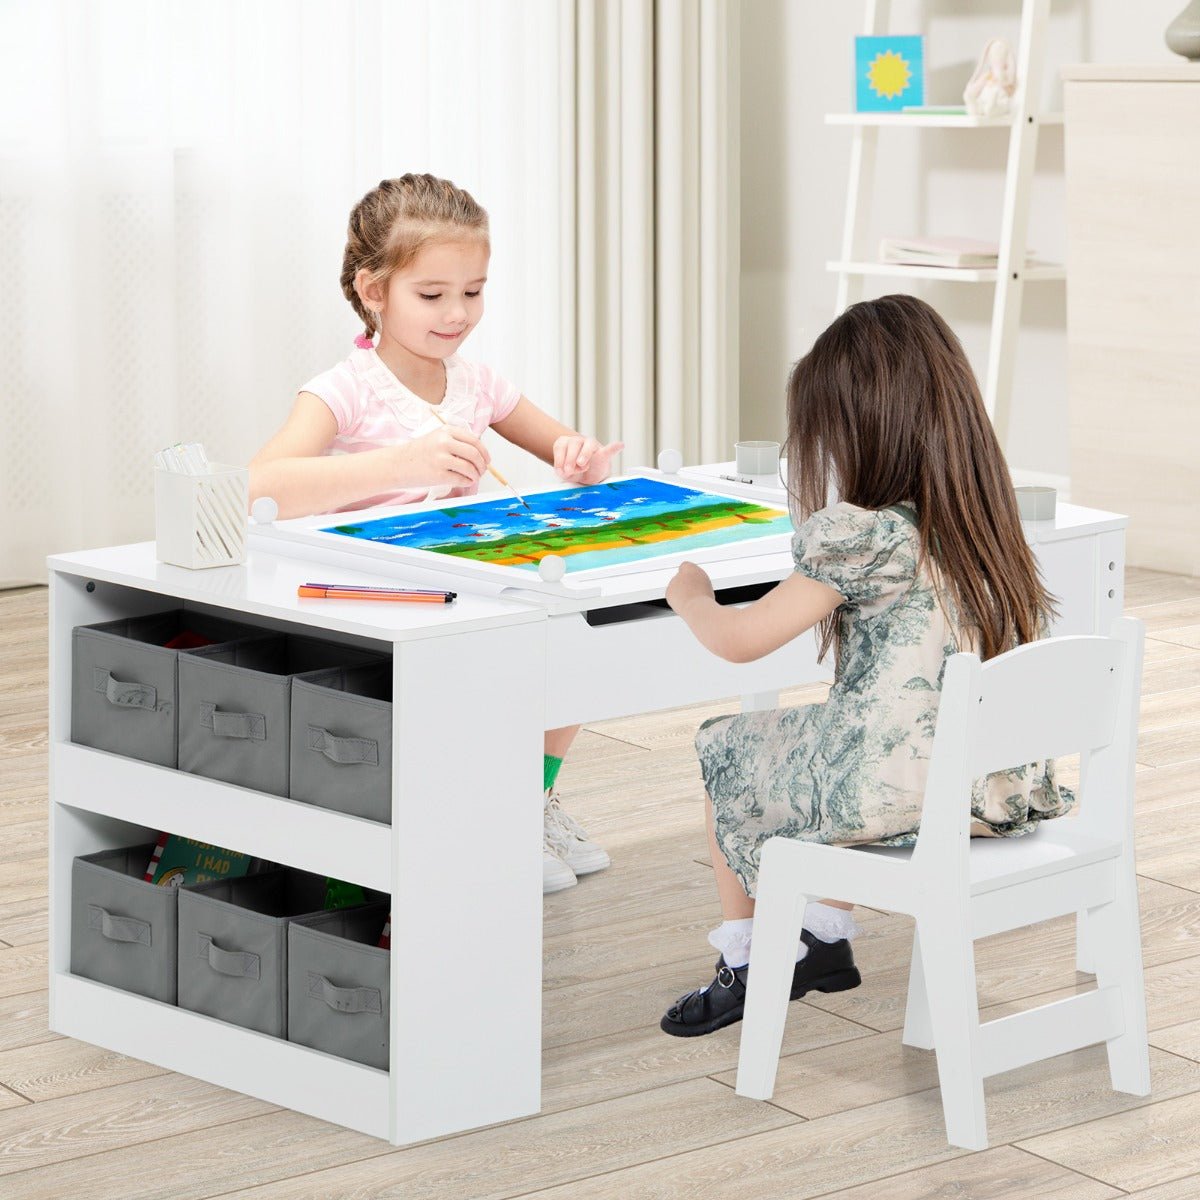 Versatile Art Table for Daycare and Home Use